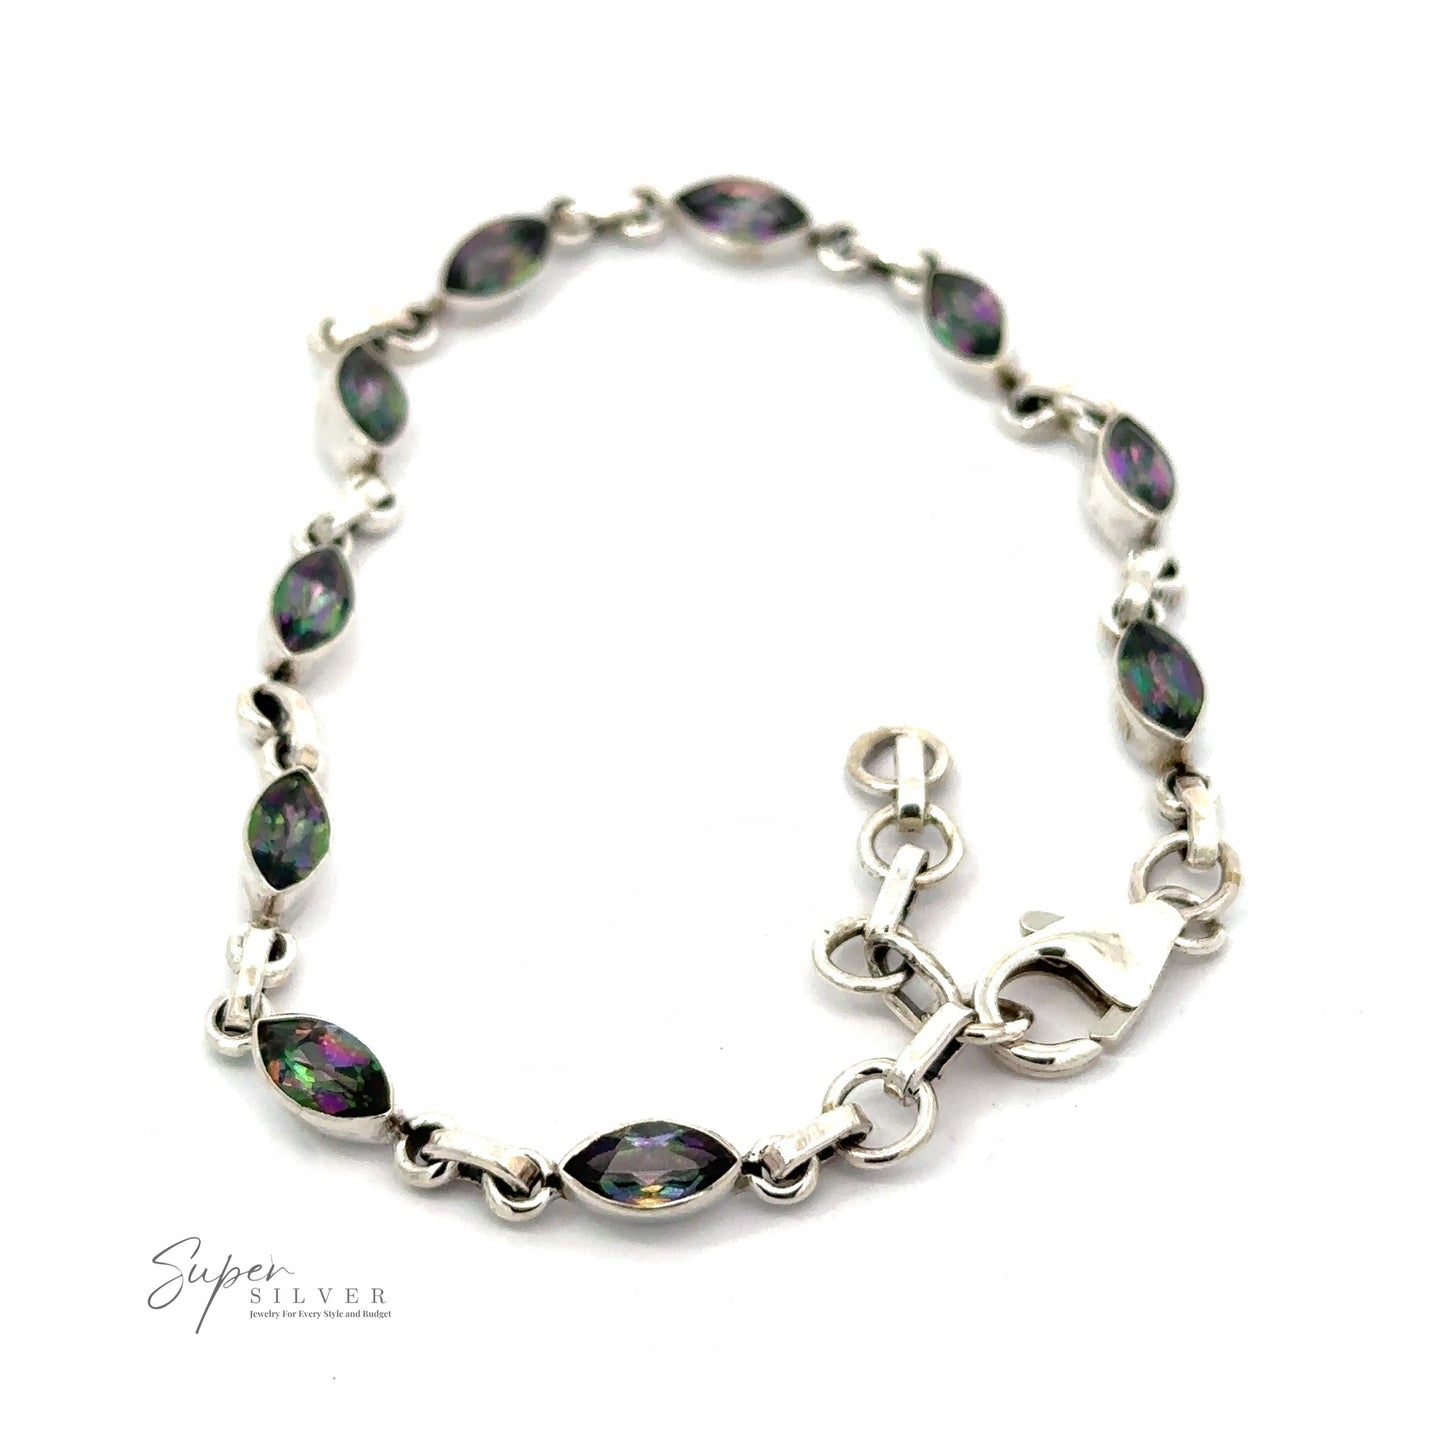 
                  
                    The sterling silver bracelet features oval-shaped stones with multicolored iridescent patterns. A lobster clasp ensures secure fastening, and "Super Silver" branding is visible in the bottom left corner. This beautiful Rainbow Mystic Topaz Marquise Link Bracelet adds a touch of mystique to any outfit.
                  
                